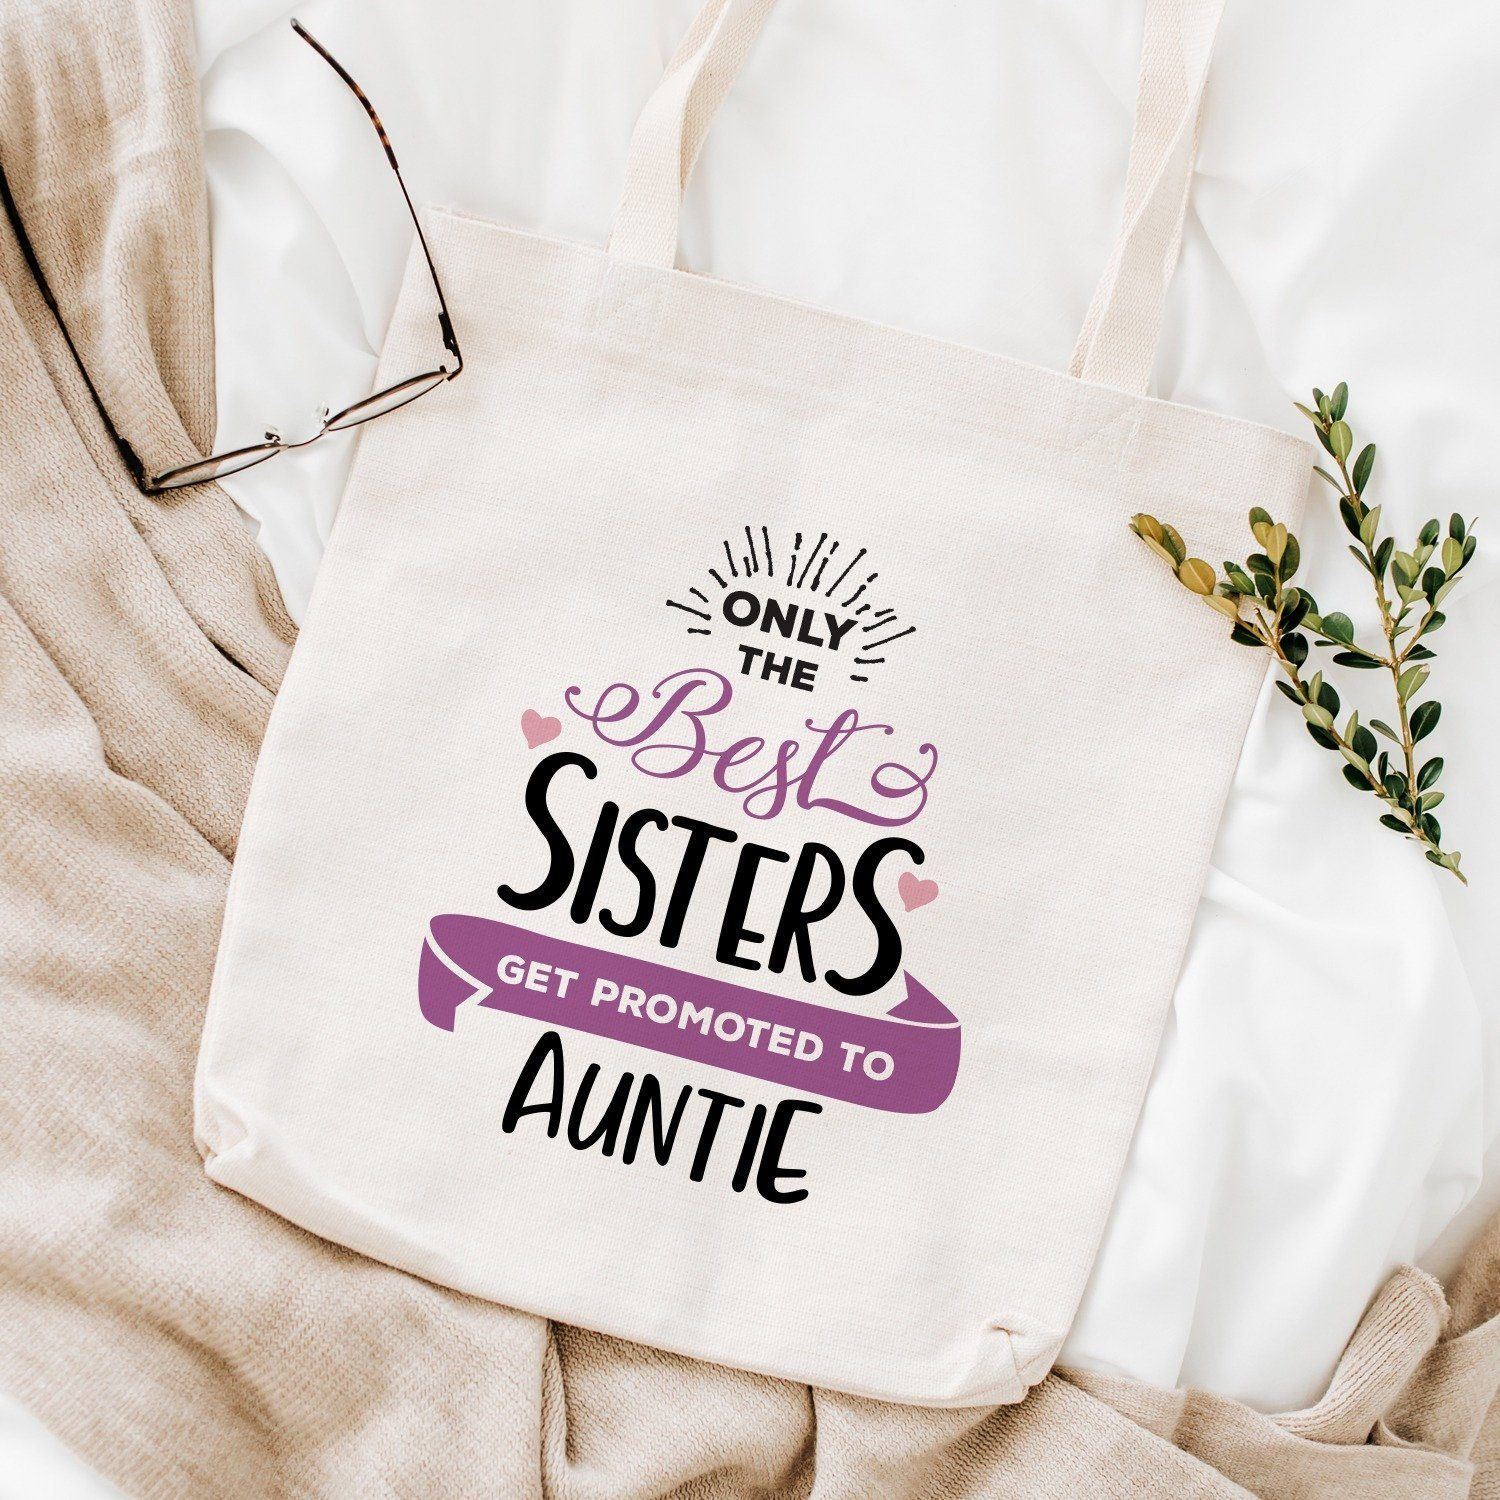 Auntie Gift, Aunt To Be, Only The Best Sisters Get Promoted To Auntie Shopping Bag